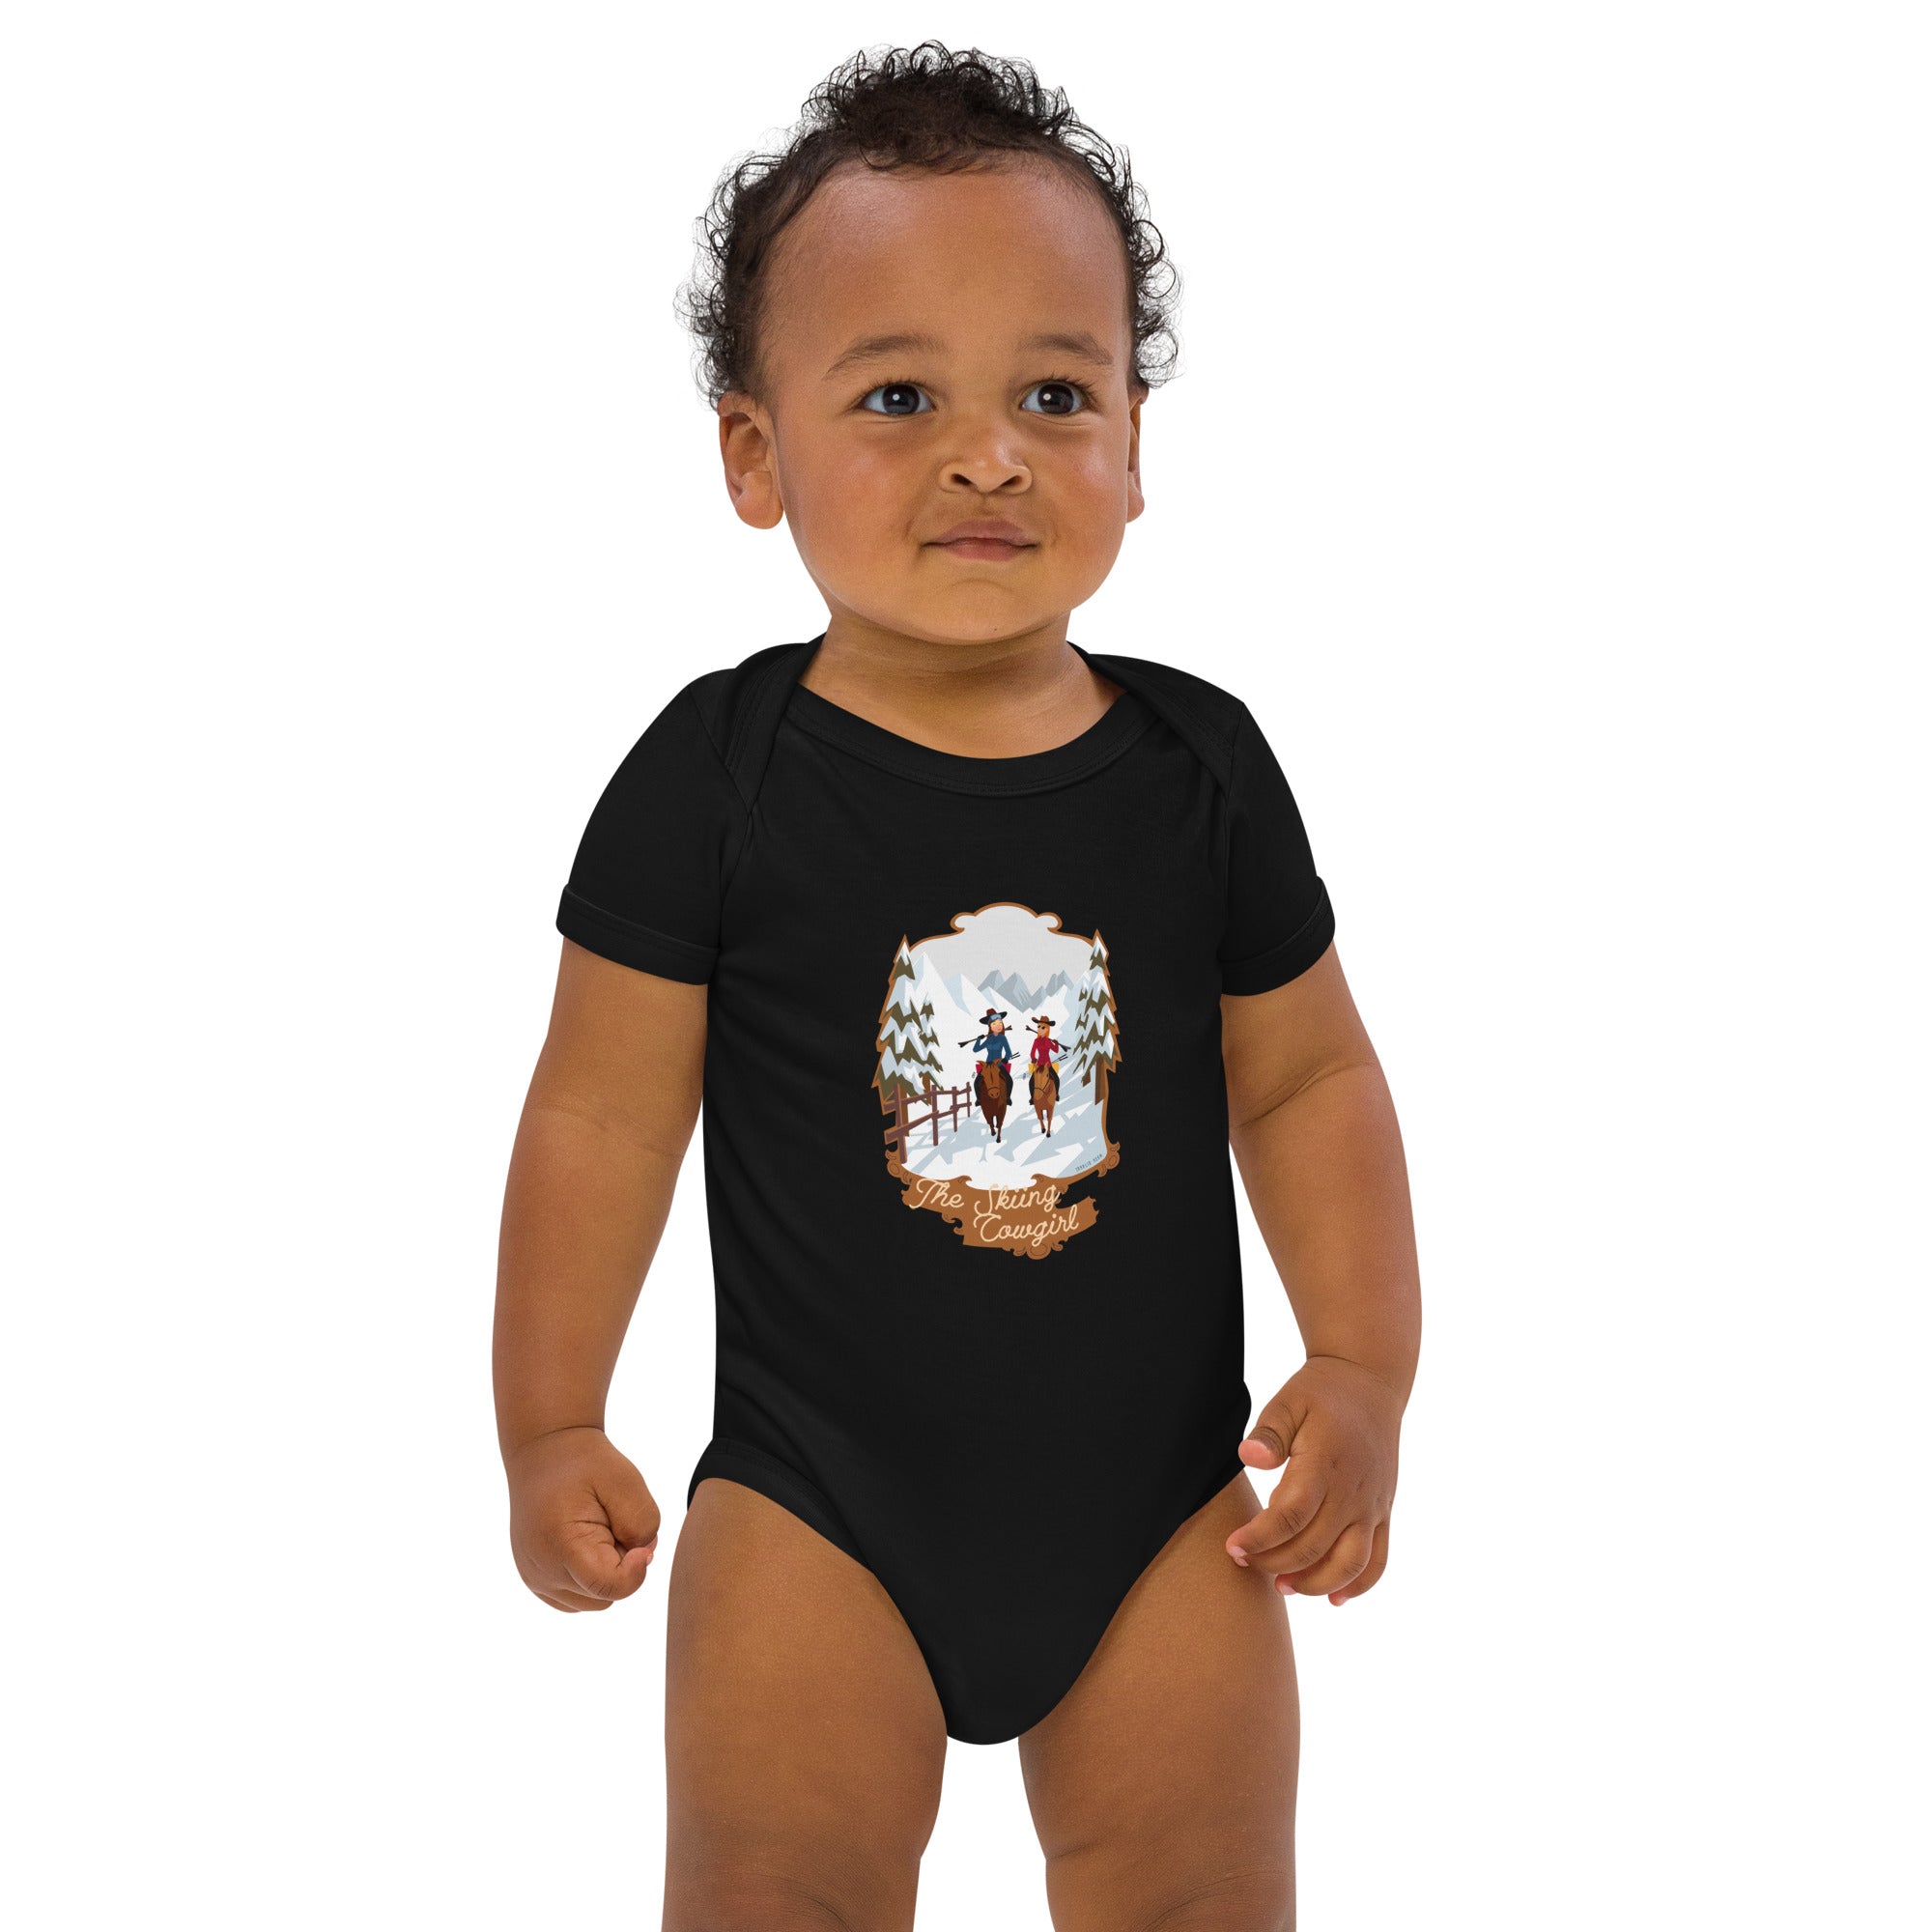 Organic cotton baby bodysuit The Skiing Cowgirl